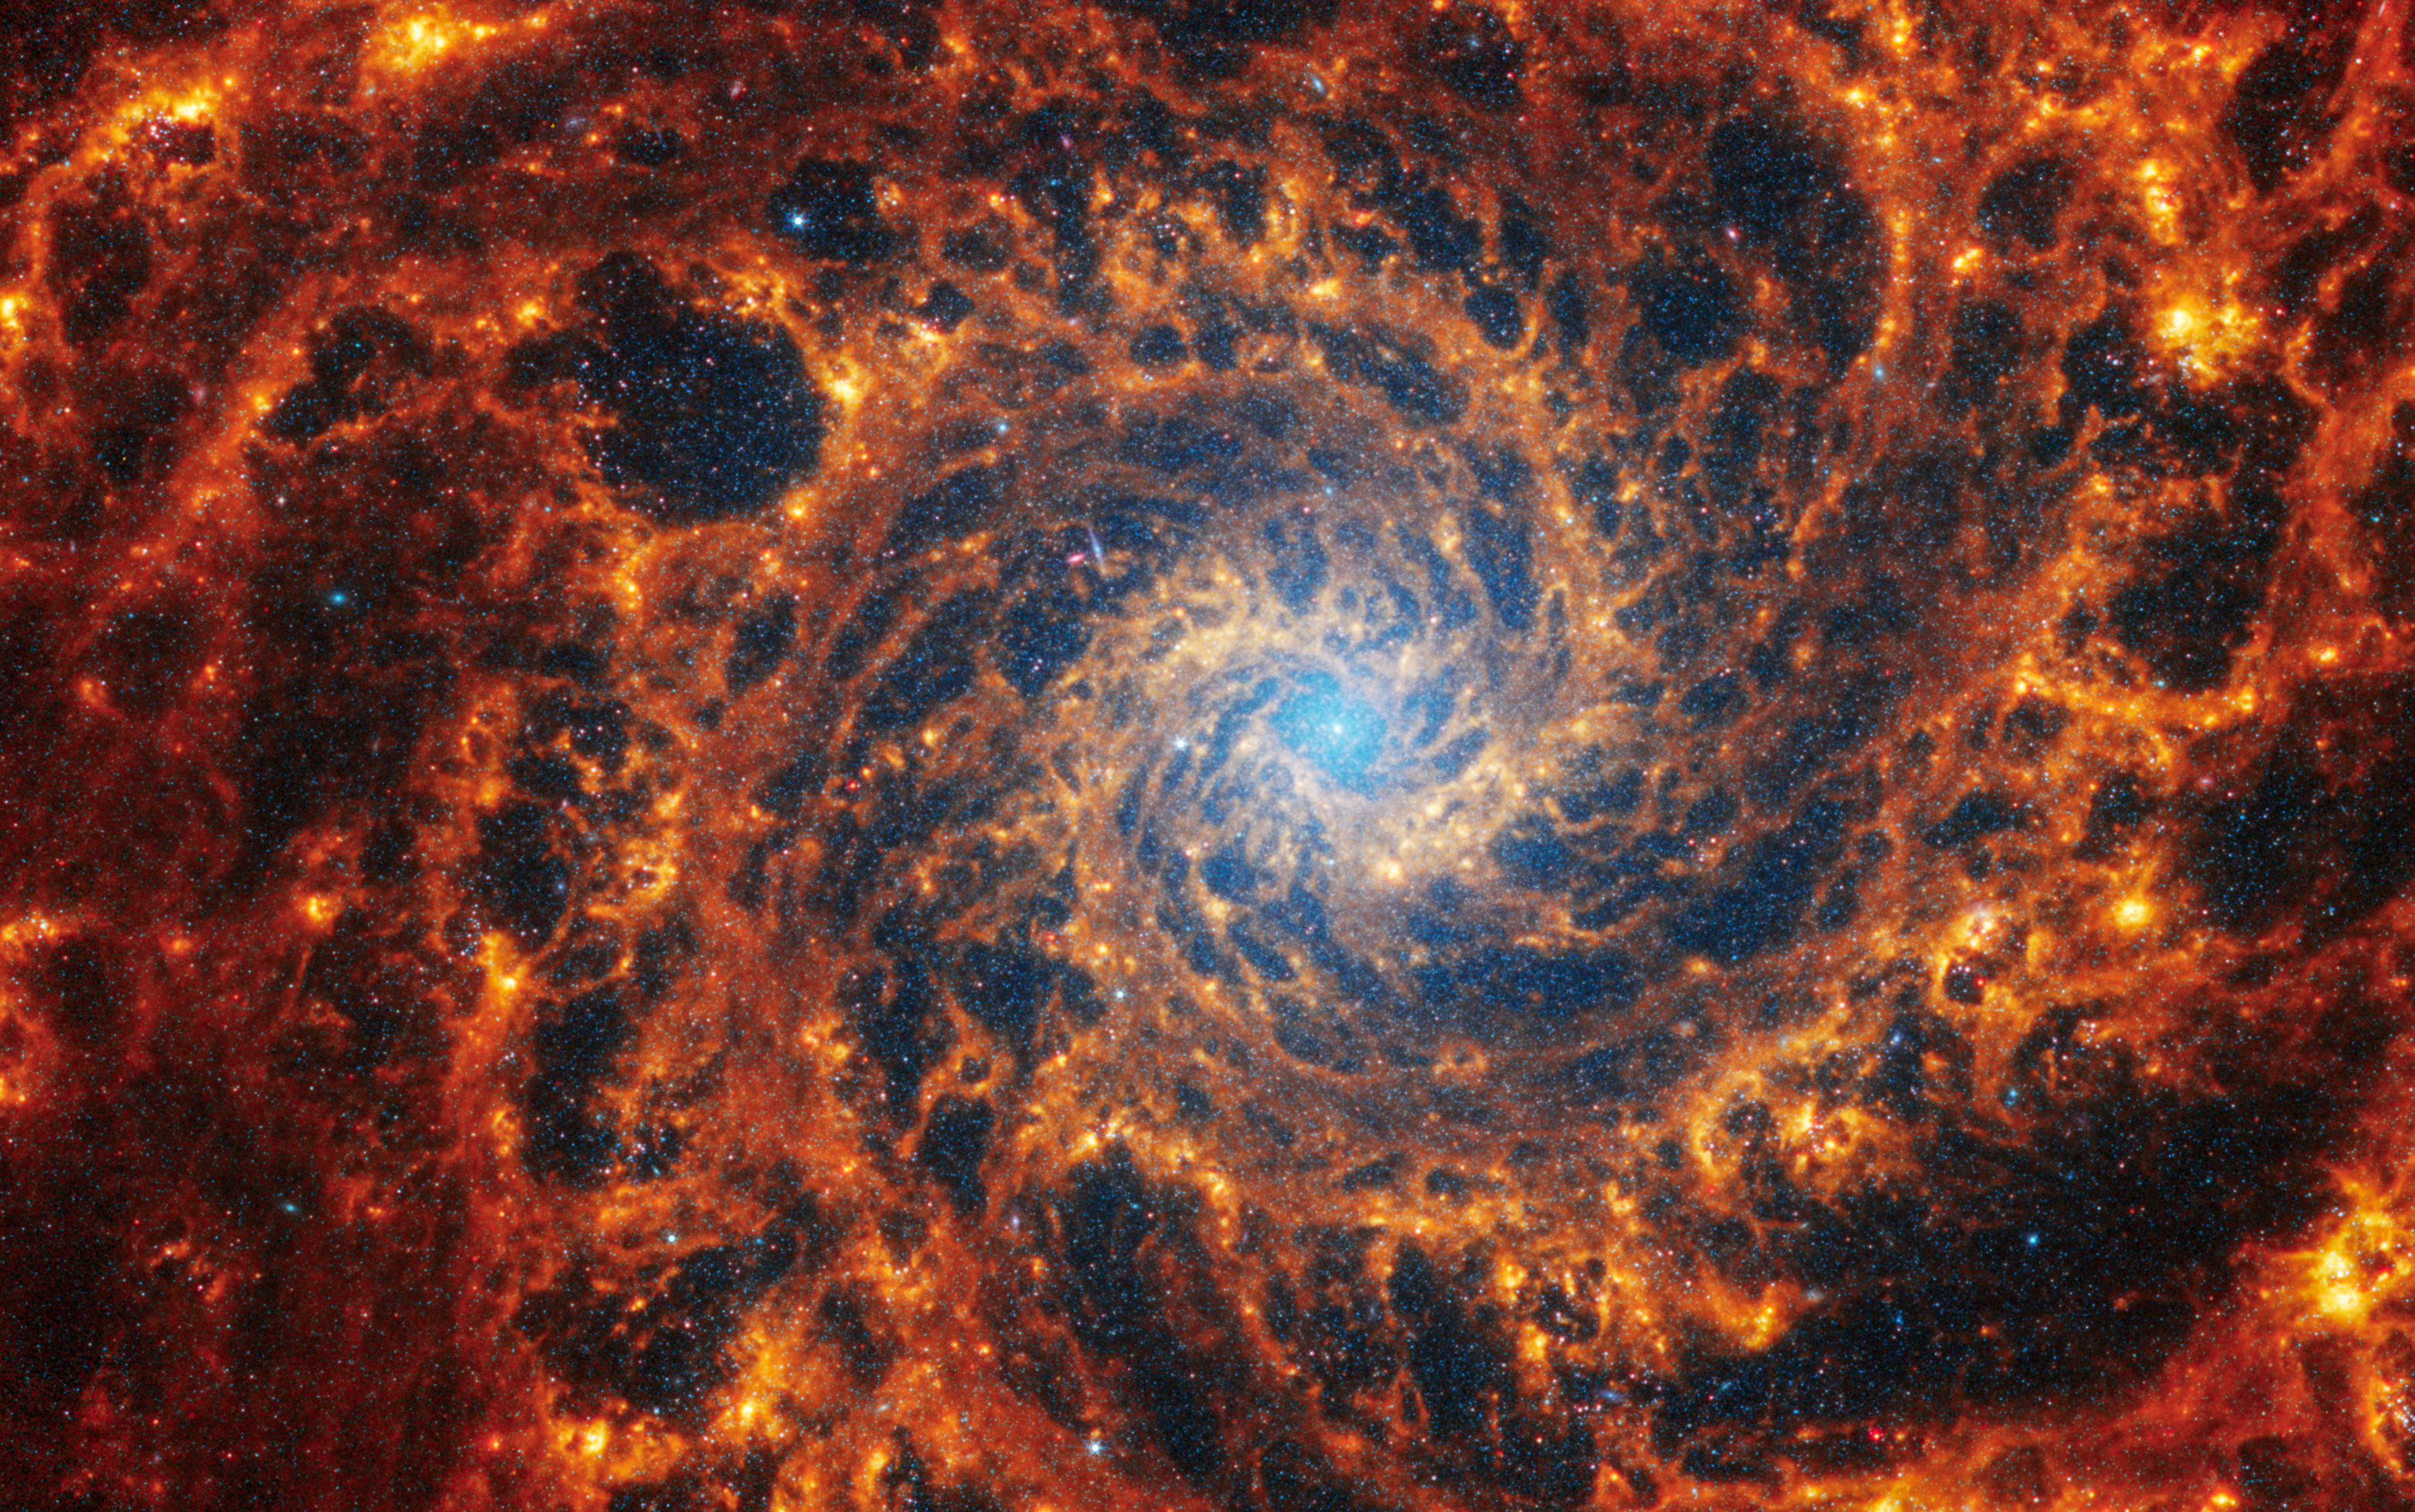 Image of face-on spiral galaxy, NGC 628 as taken by Webb telescope